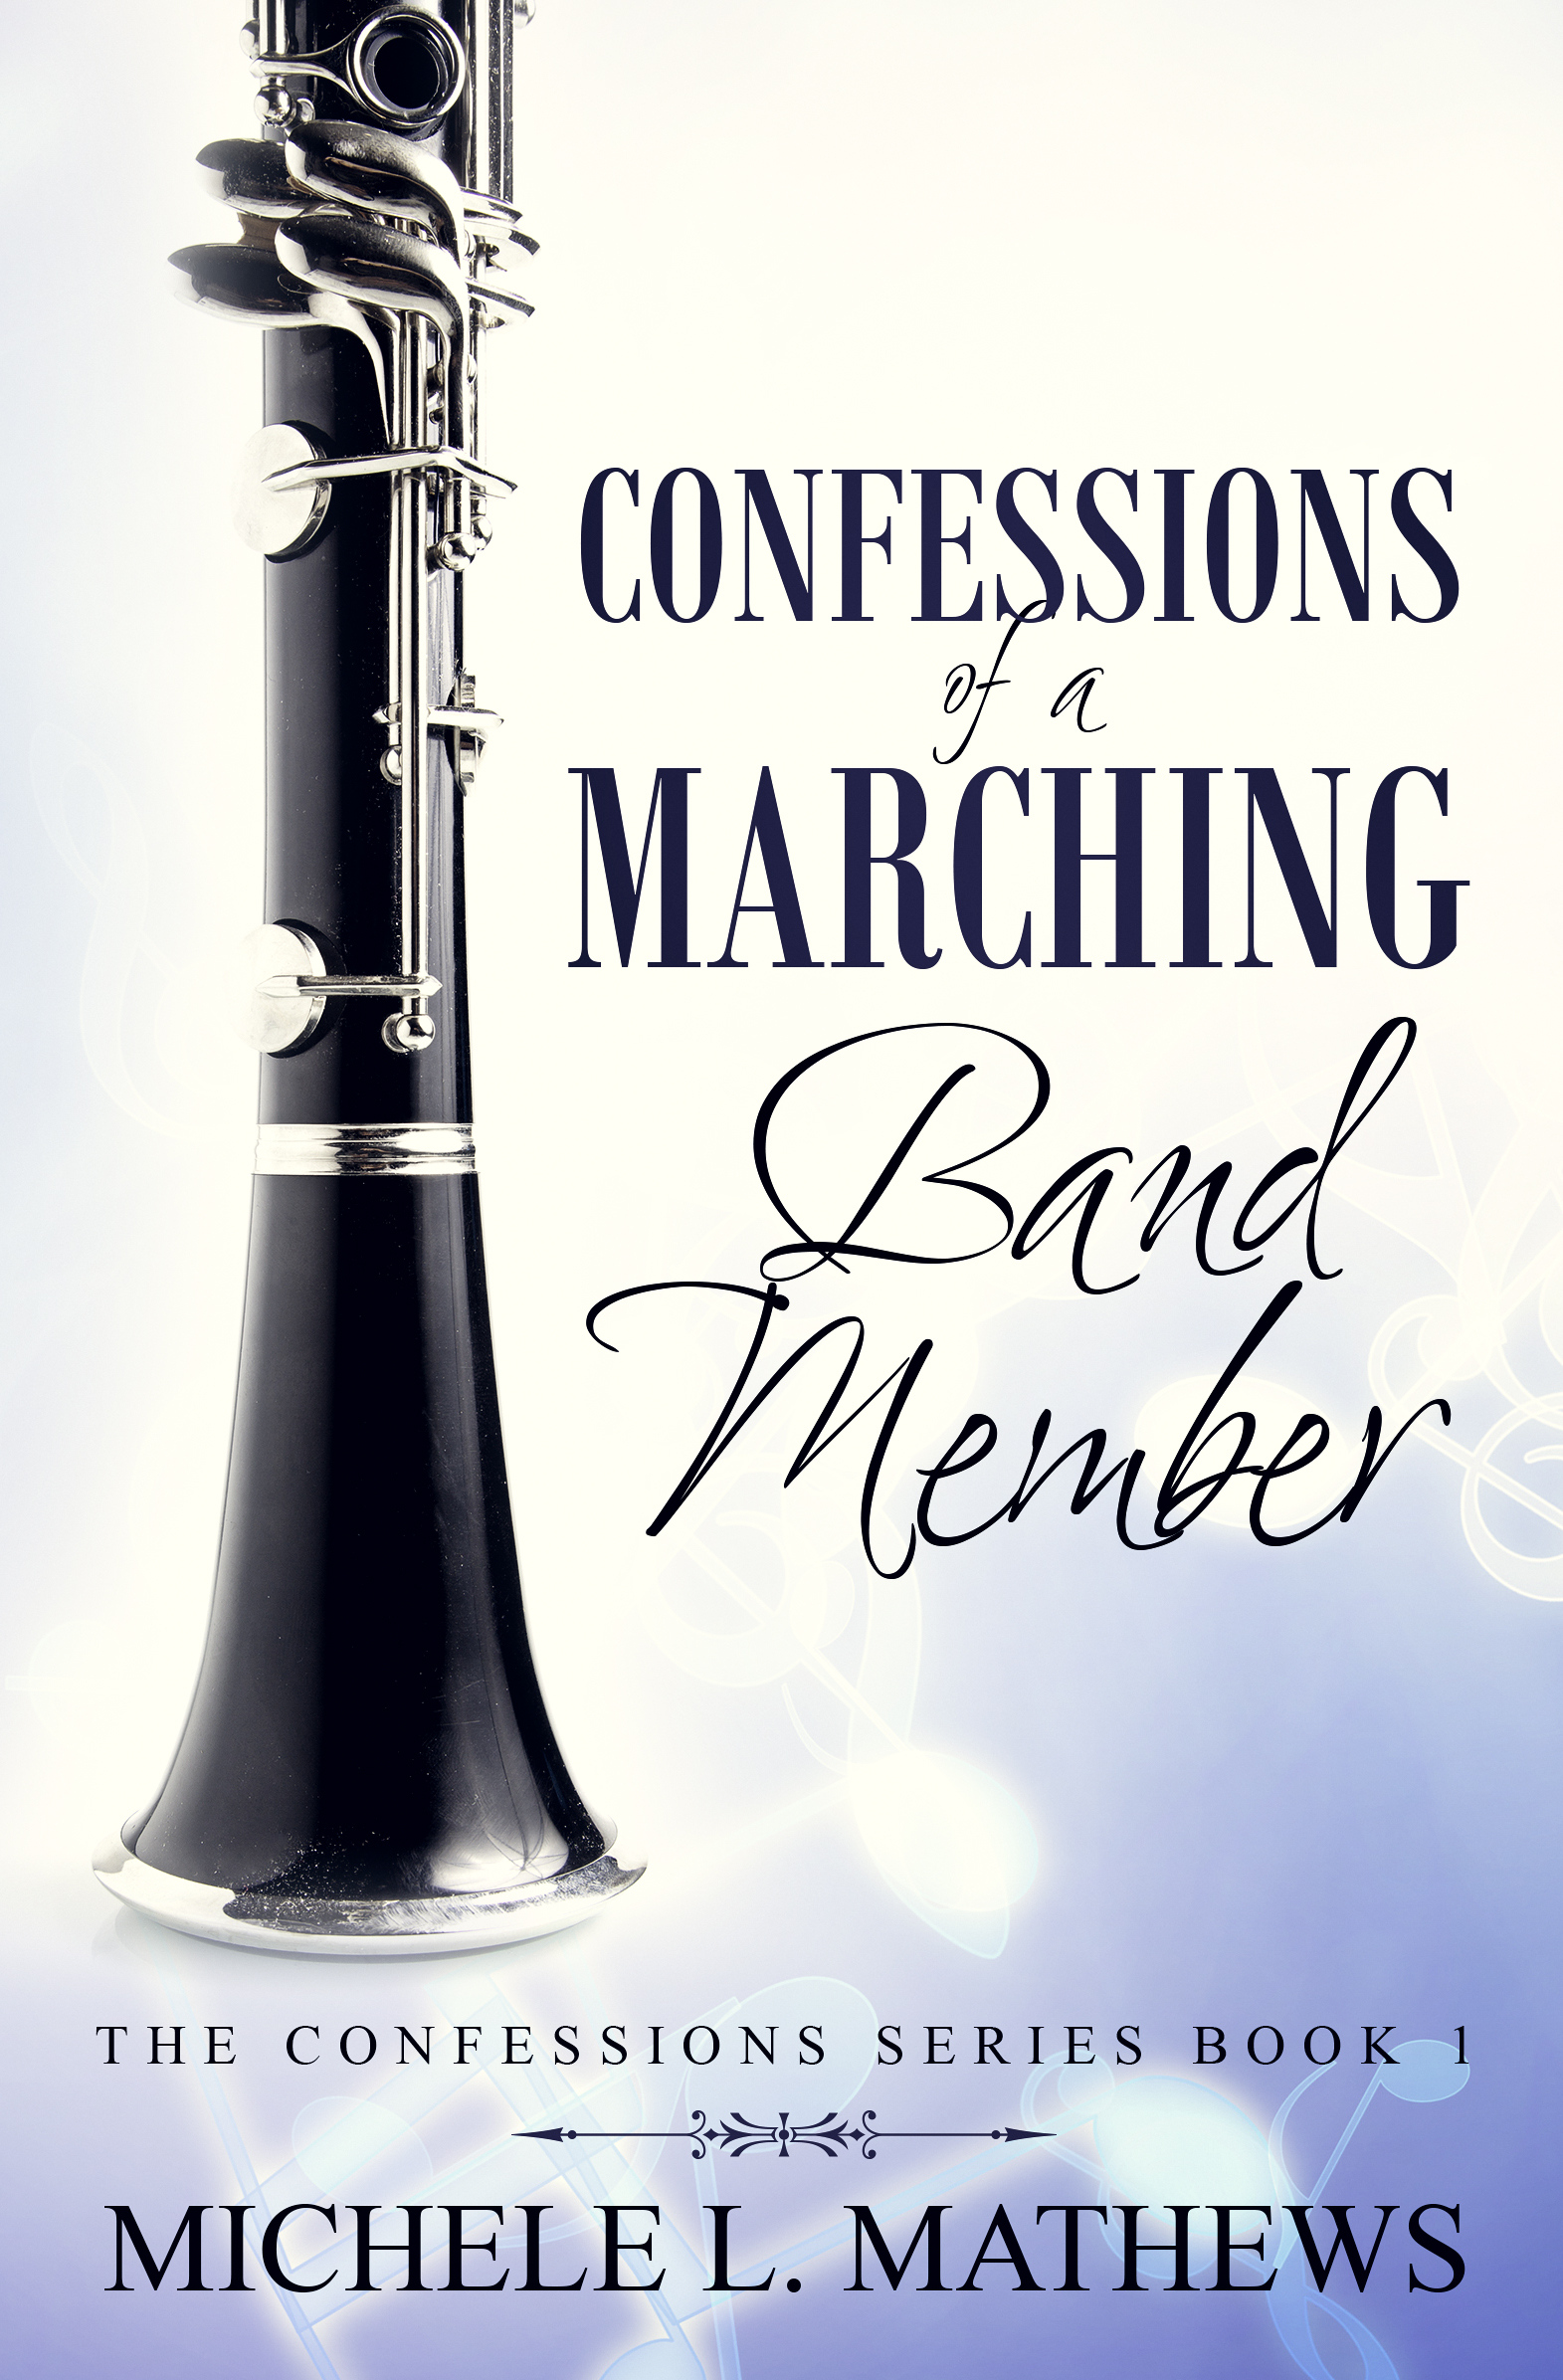 confessions series, memoir, marching band, author,writer